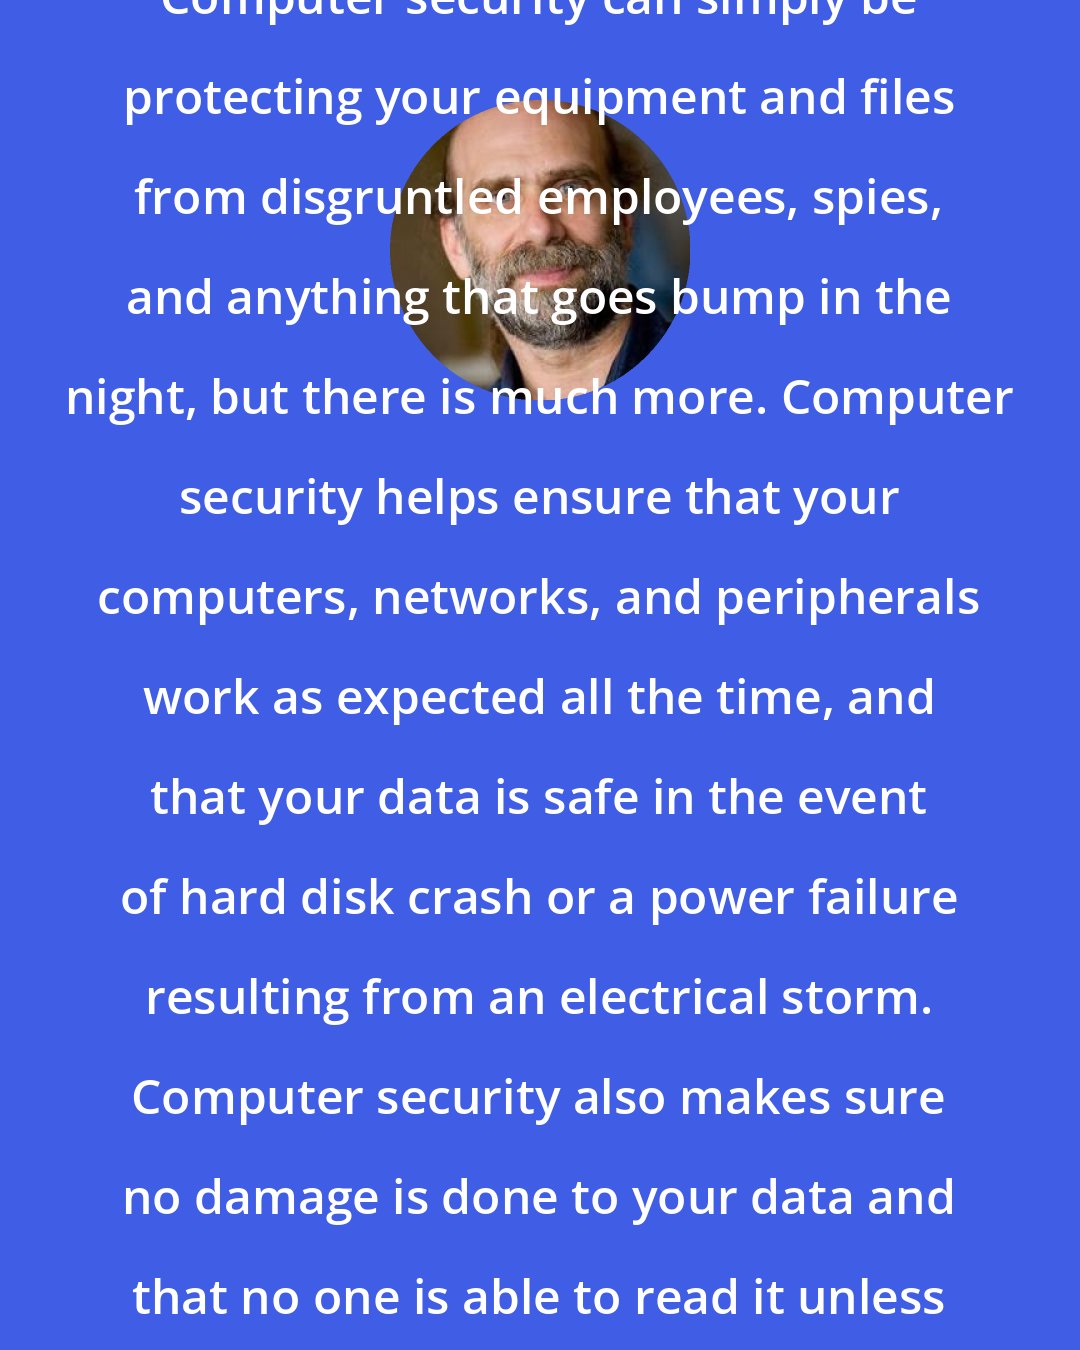 Bruce Schneier: Computer security can simply be protecting your equipment and files from disgruntled employees, spies, and anything that goes bump in the night, but there is much more. Computer security helps ensure that your computers, networks, and peripherals work as expected all the time, and that your data is safe in the event of hard disk crash or a power failure resulting from an electrical storm. Computer security also makes sure no damage is done to your data and that no one is able to read it unless you want them to.